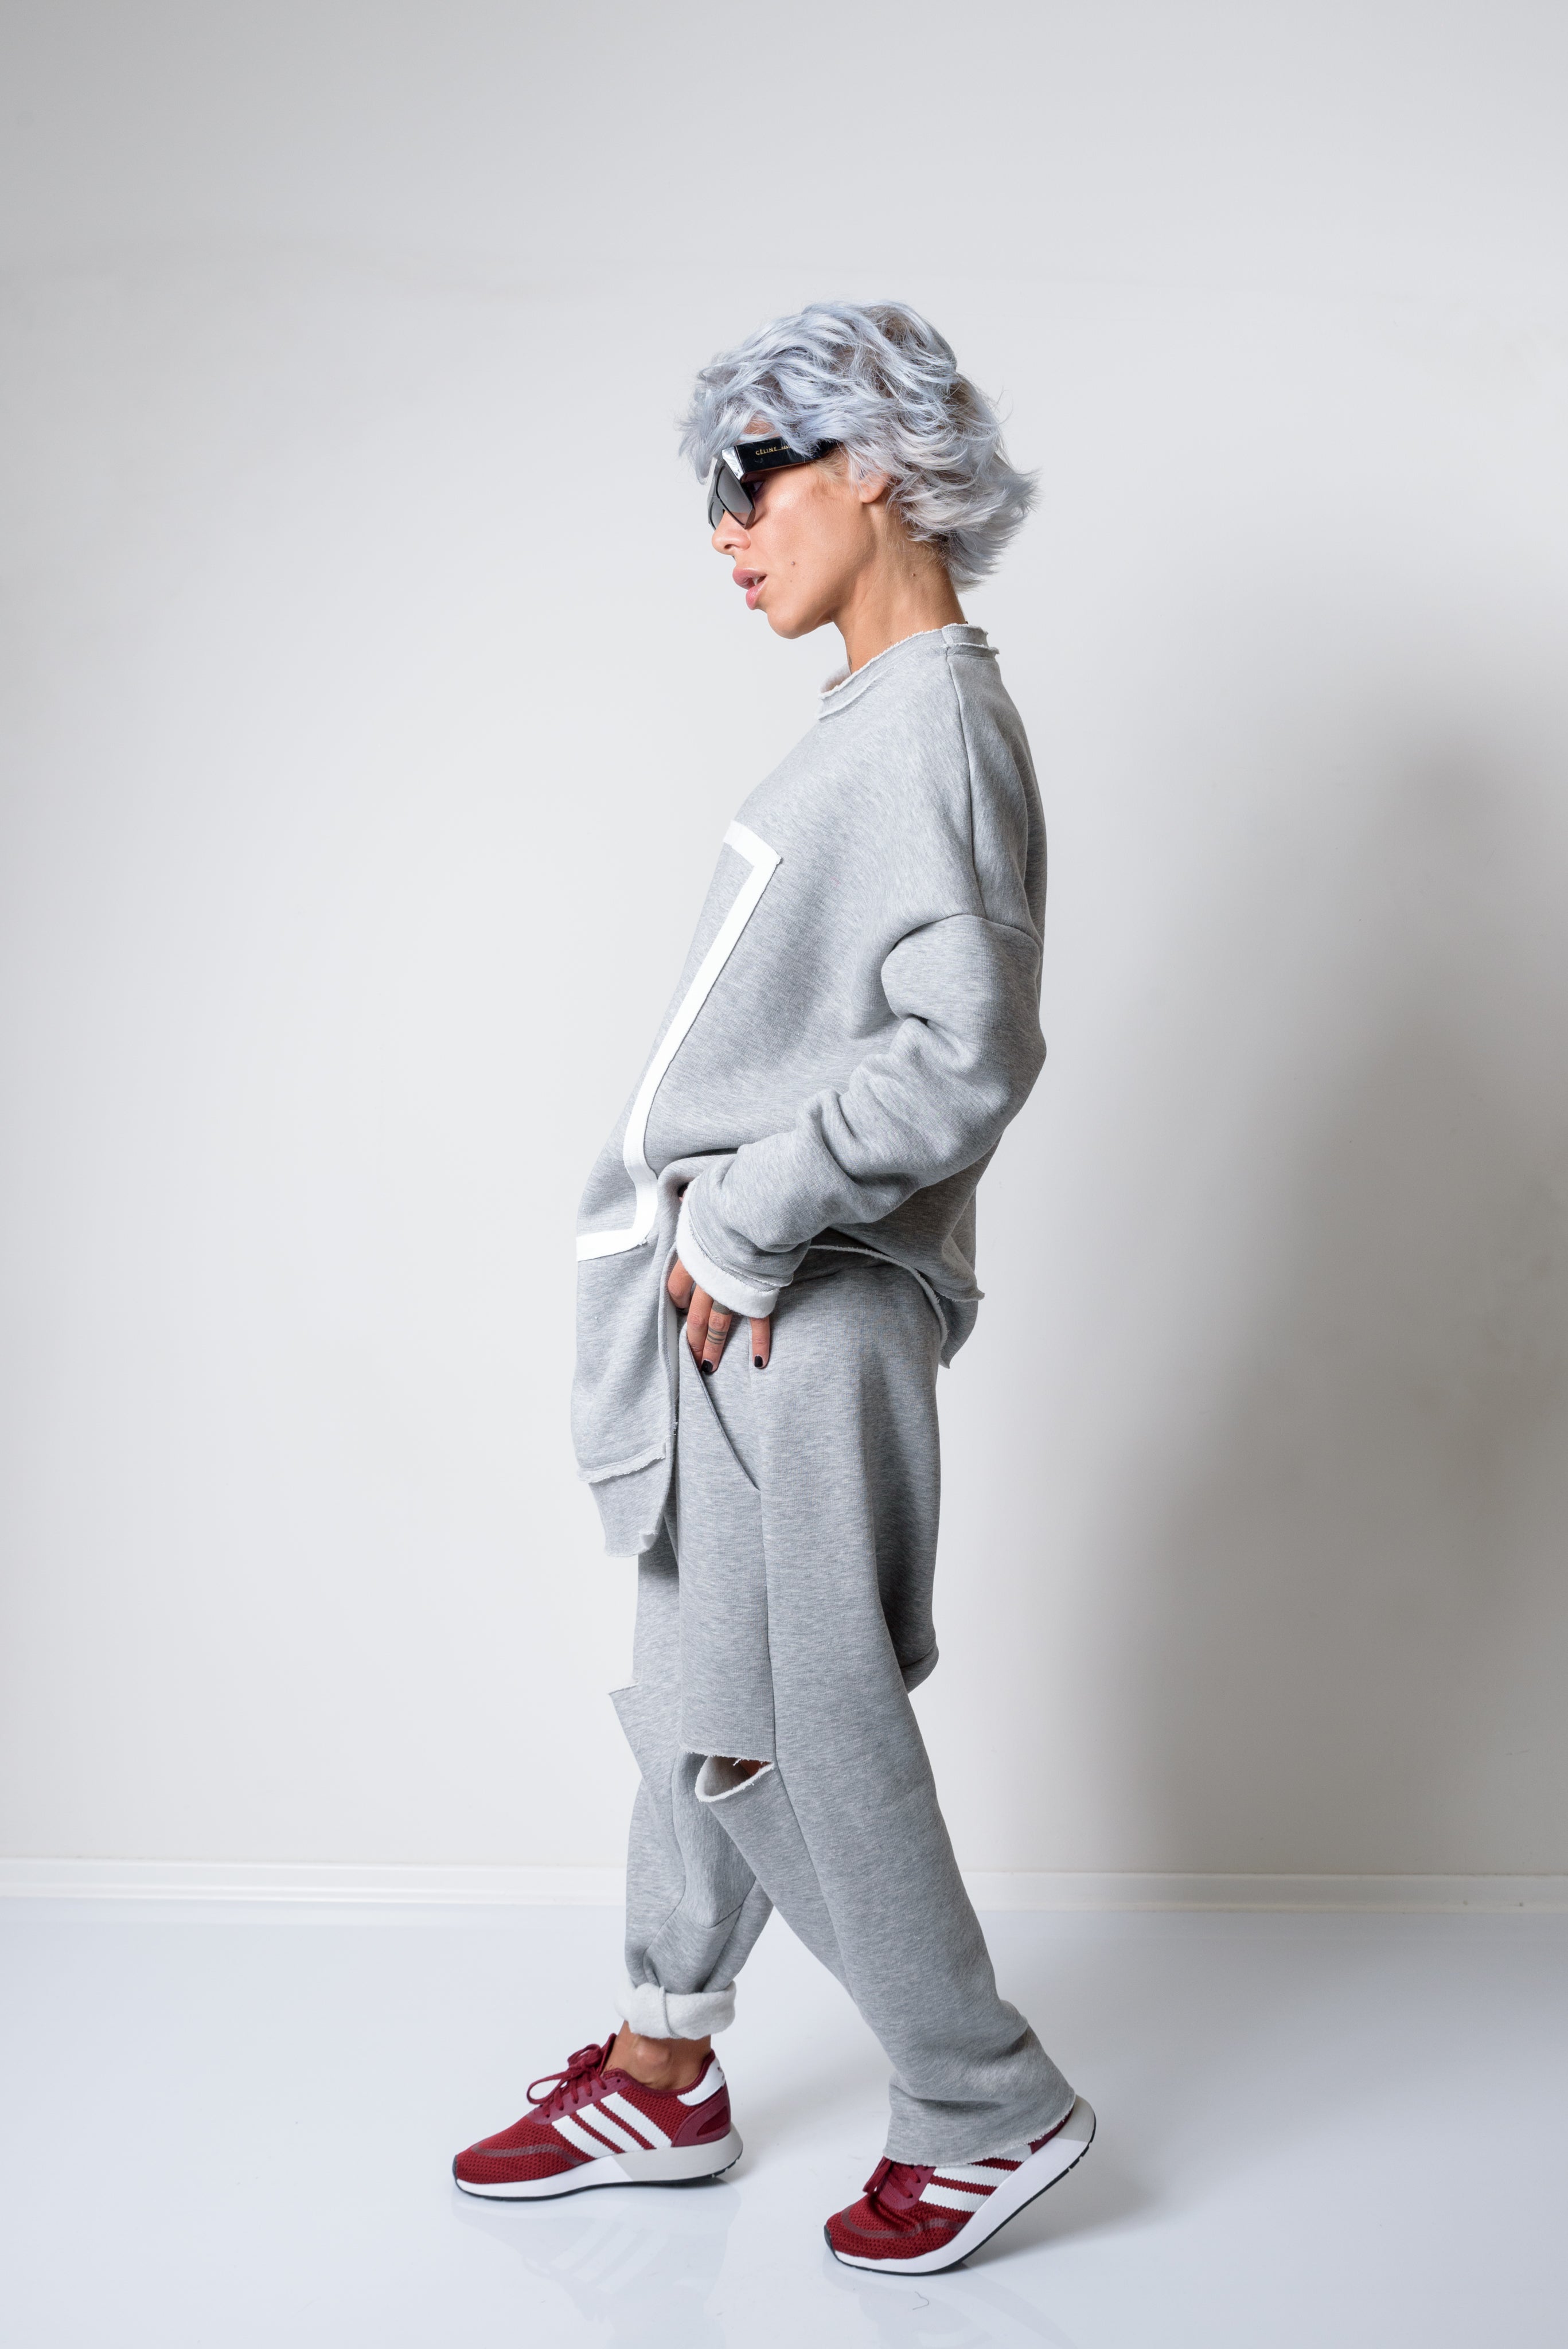 Two Piece Tracksuit Set For Women - Clothes By Locker Room